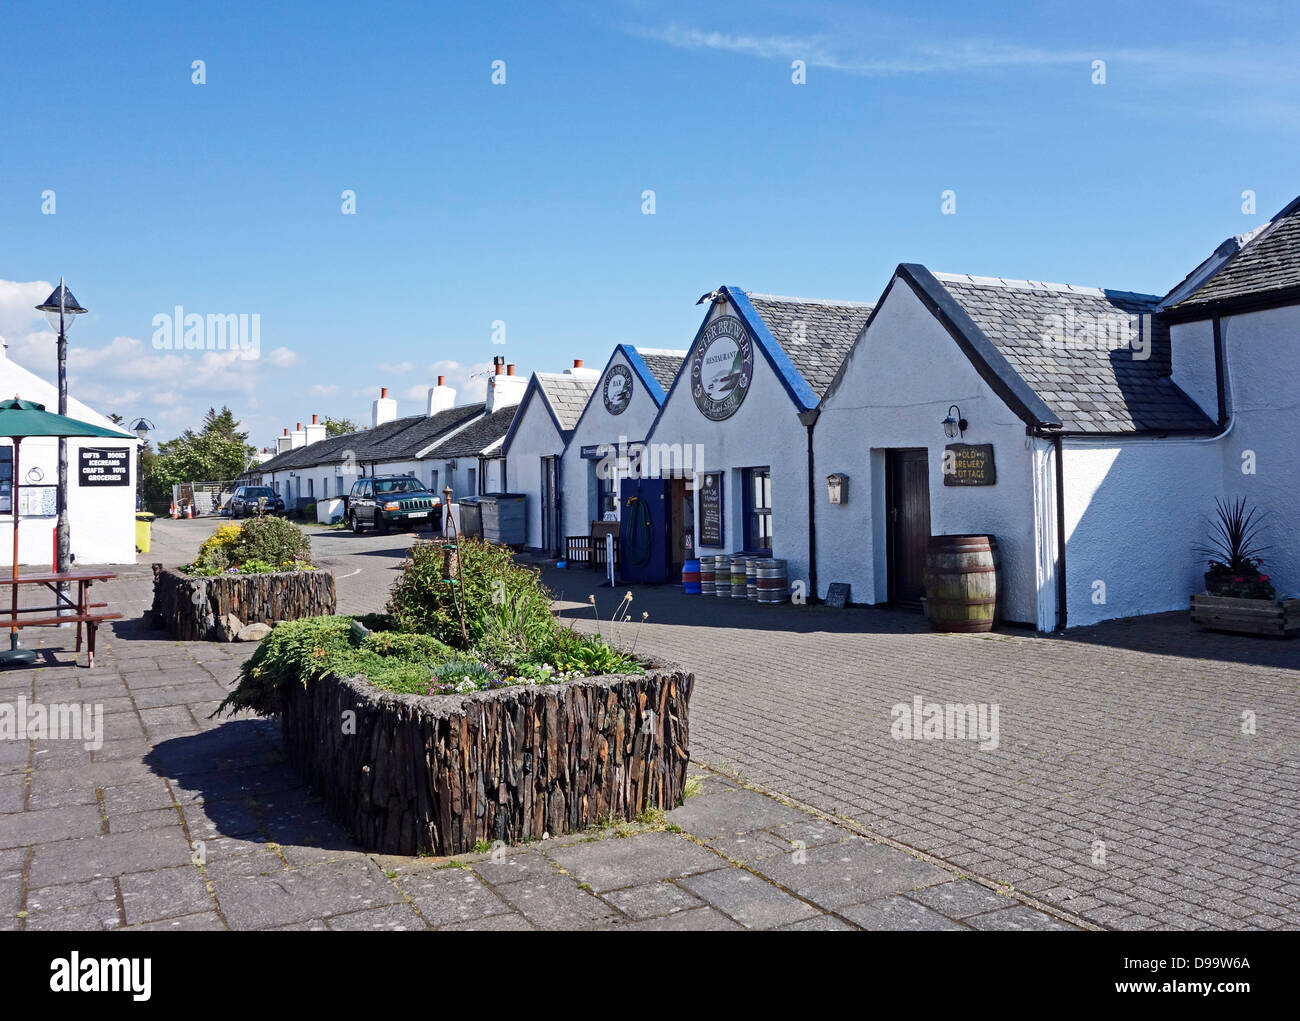 Oyster Brewery restaurant at main square in Easdale Village on the Island of Seil in Scotland Stock Photo